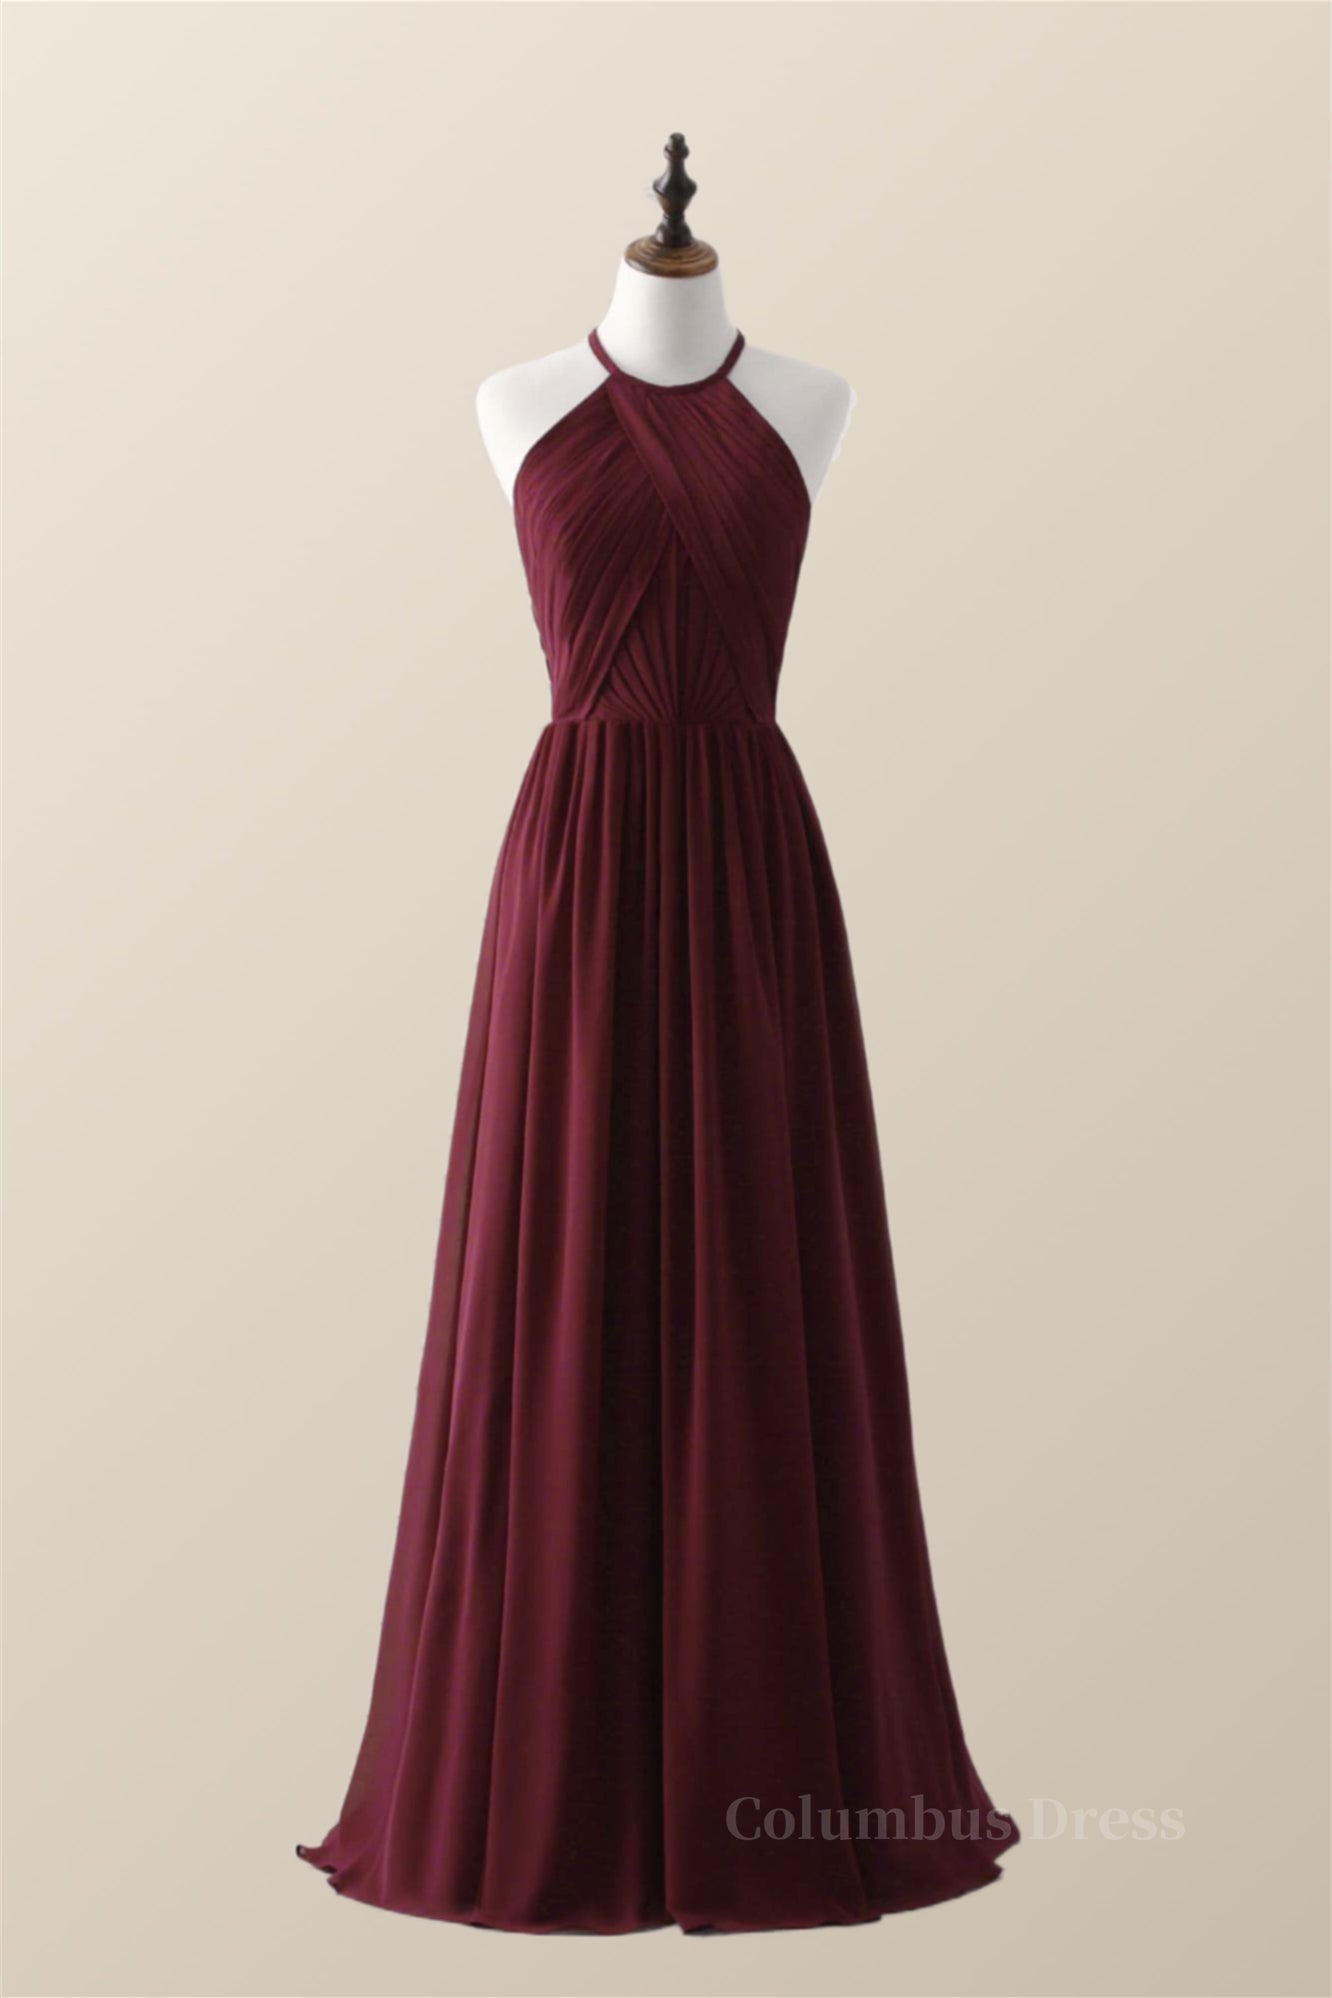 Halter Burgundy Pleated Long Corset Bridesmaid Dress outfit, Prom Dresses For Girl